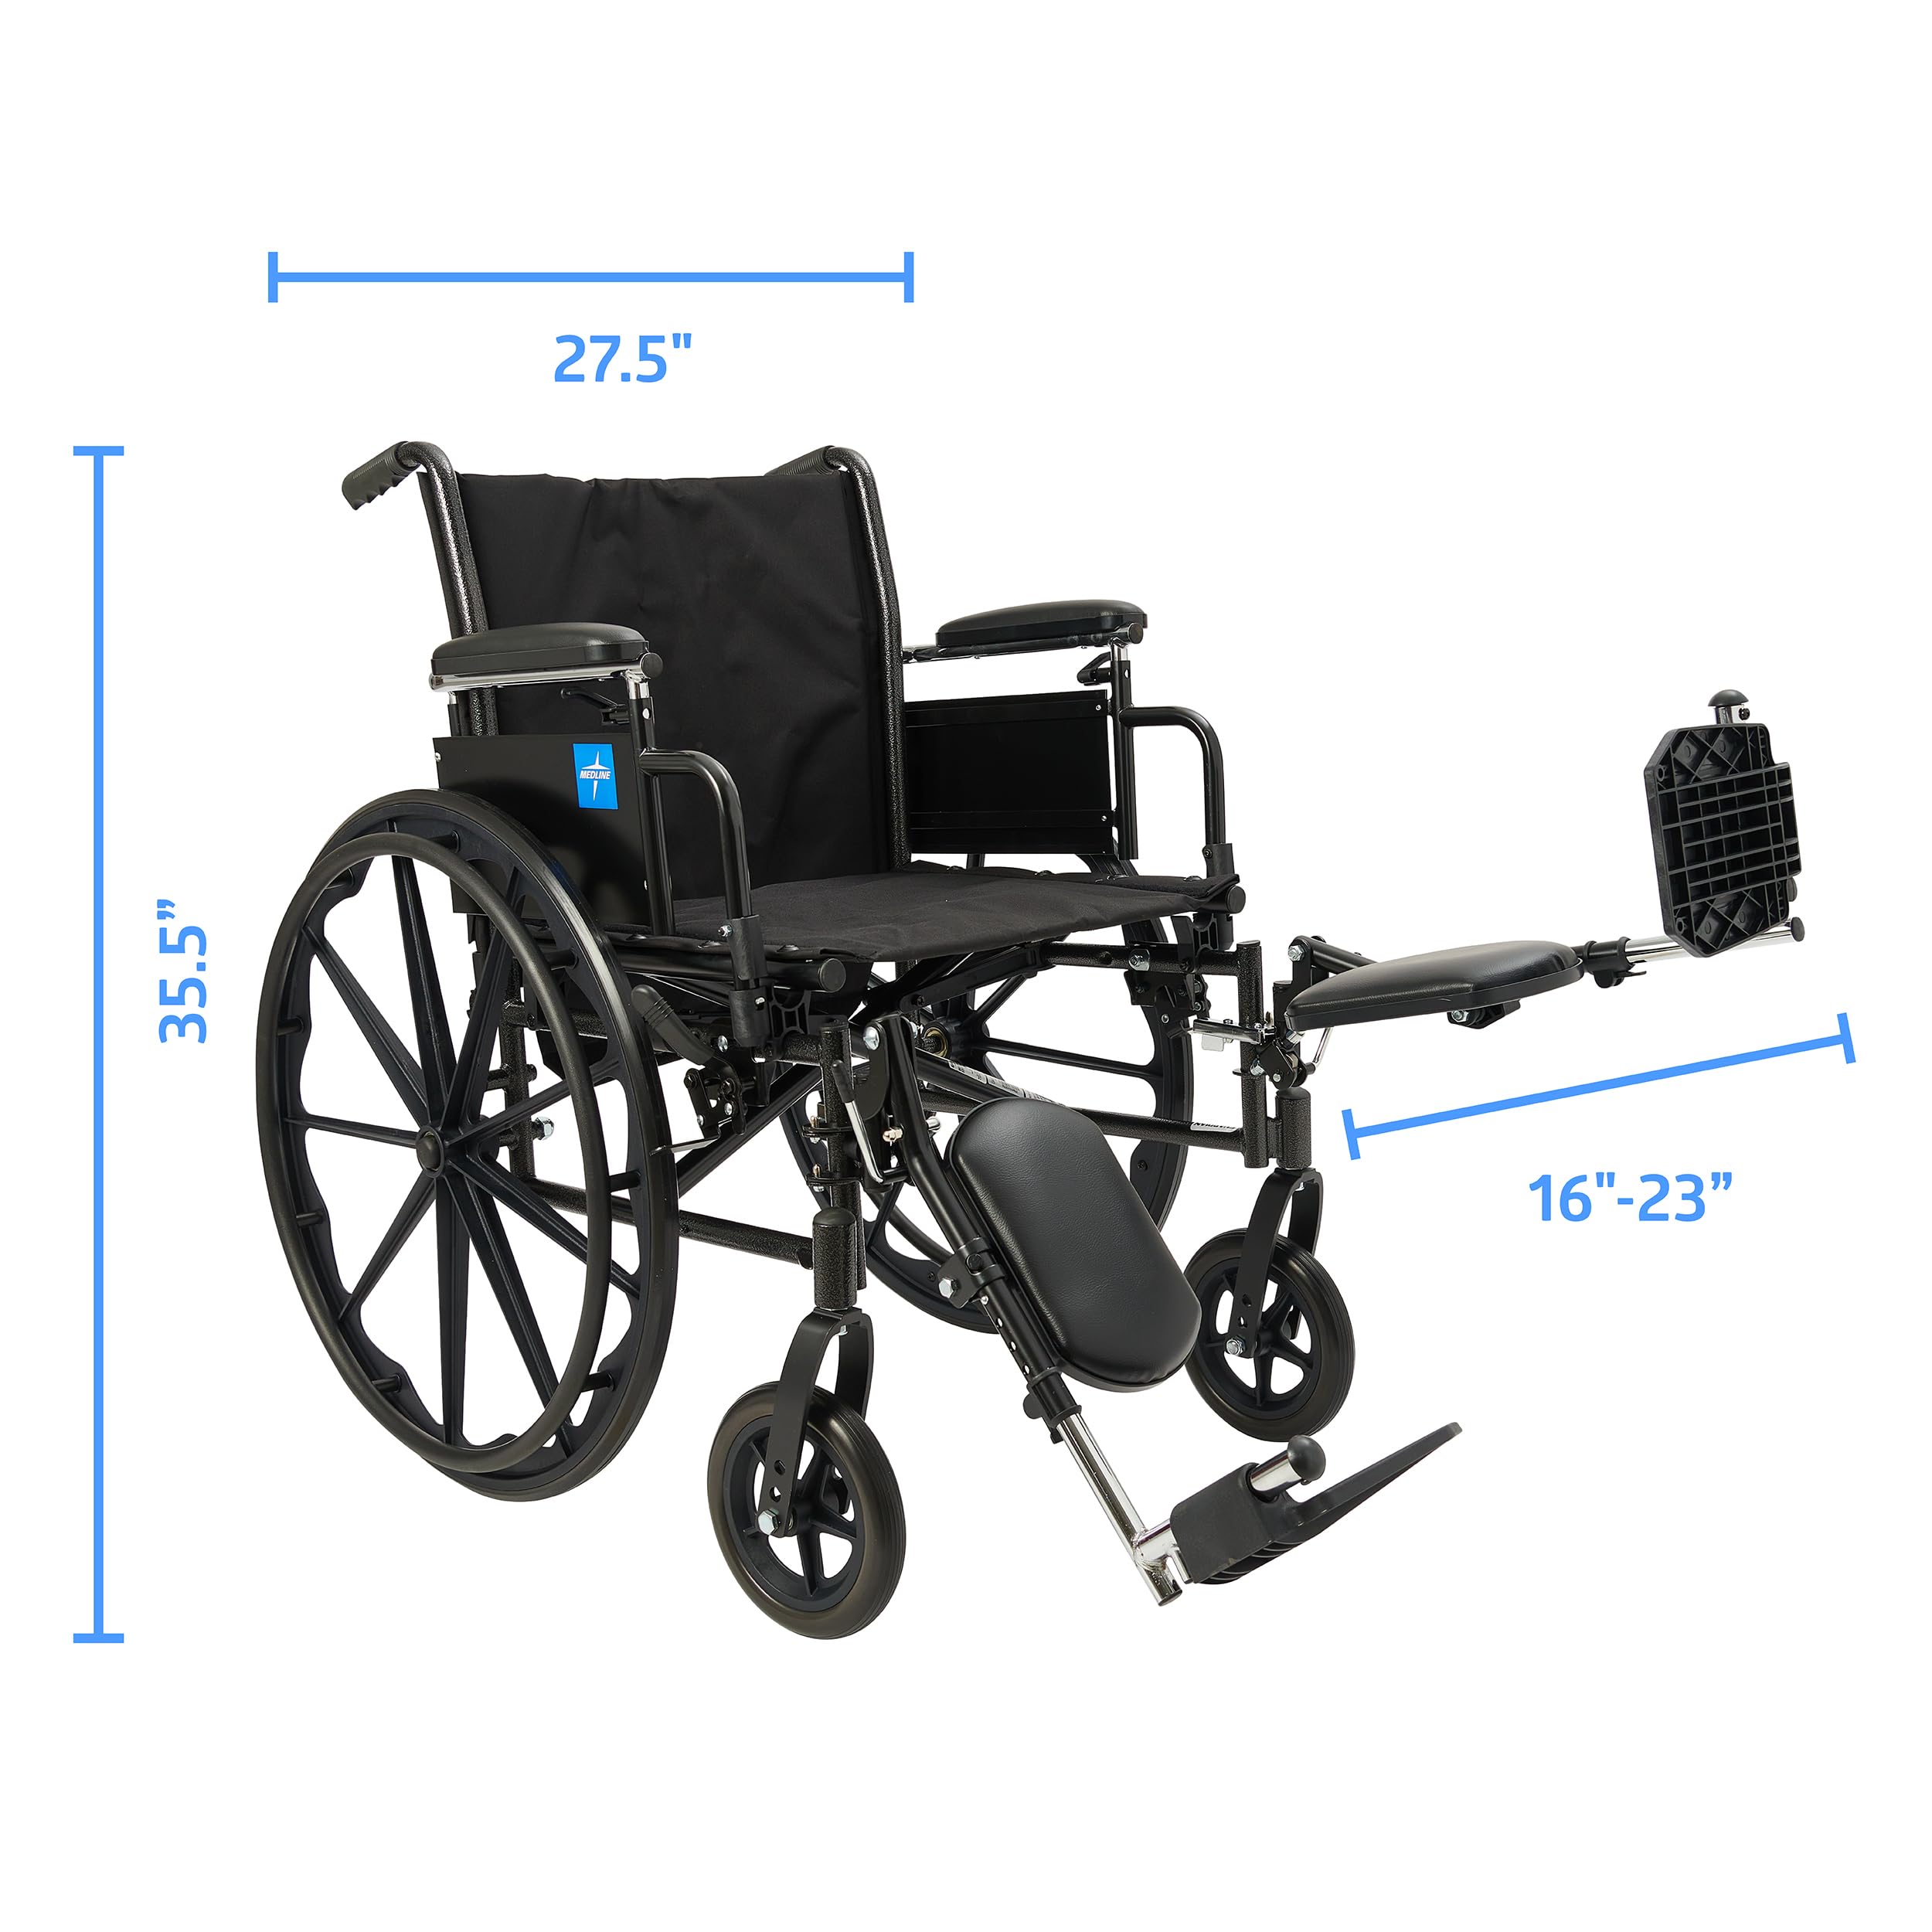 Medline 20” Height Adjustable K3 Wheelchair with Swing-Back Desk-Length Arms & Elevating Legrests, 300 lbs. Capacity Transport Aid, Adults & Seniors,Black